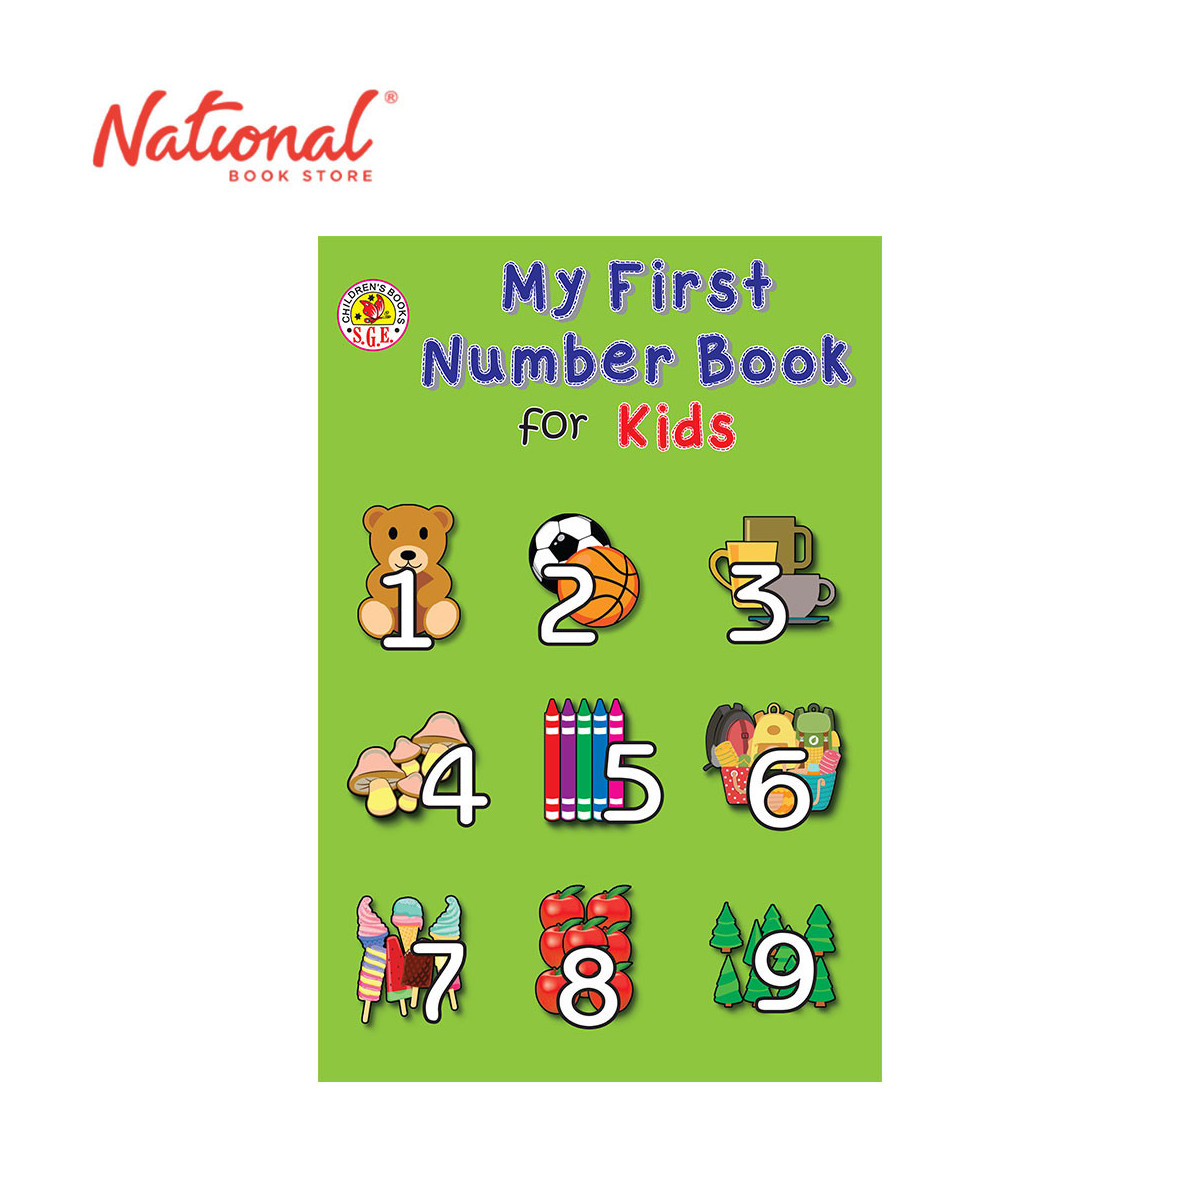 My First Number Book For Kids - Hardcover - Early Learning